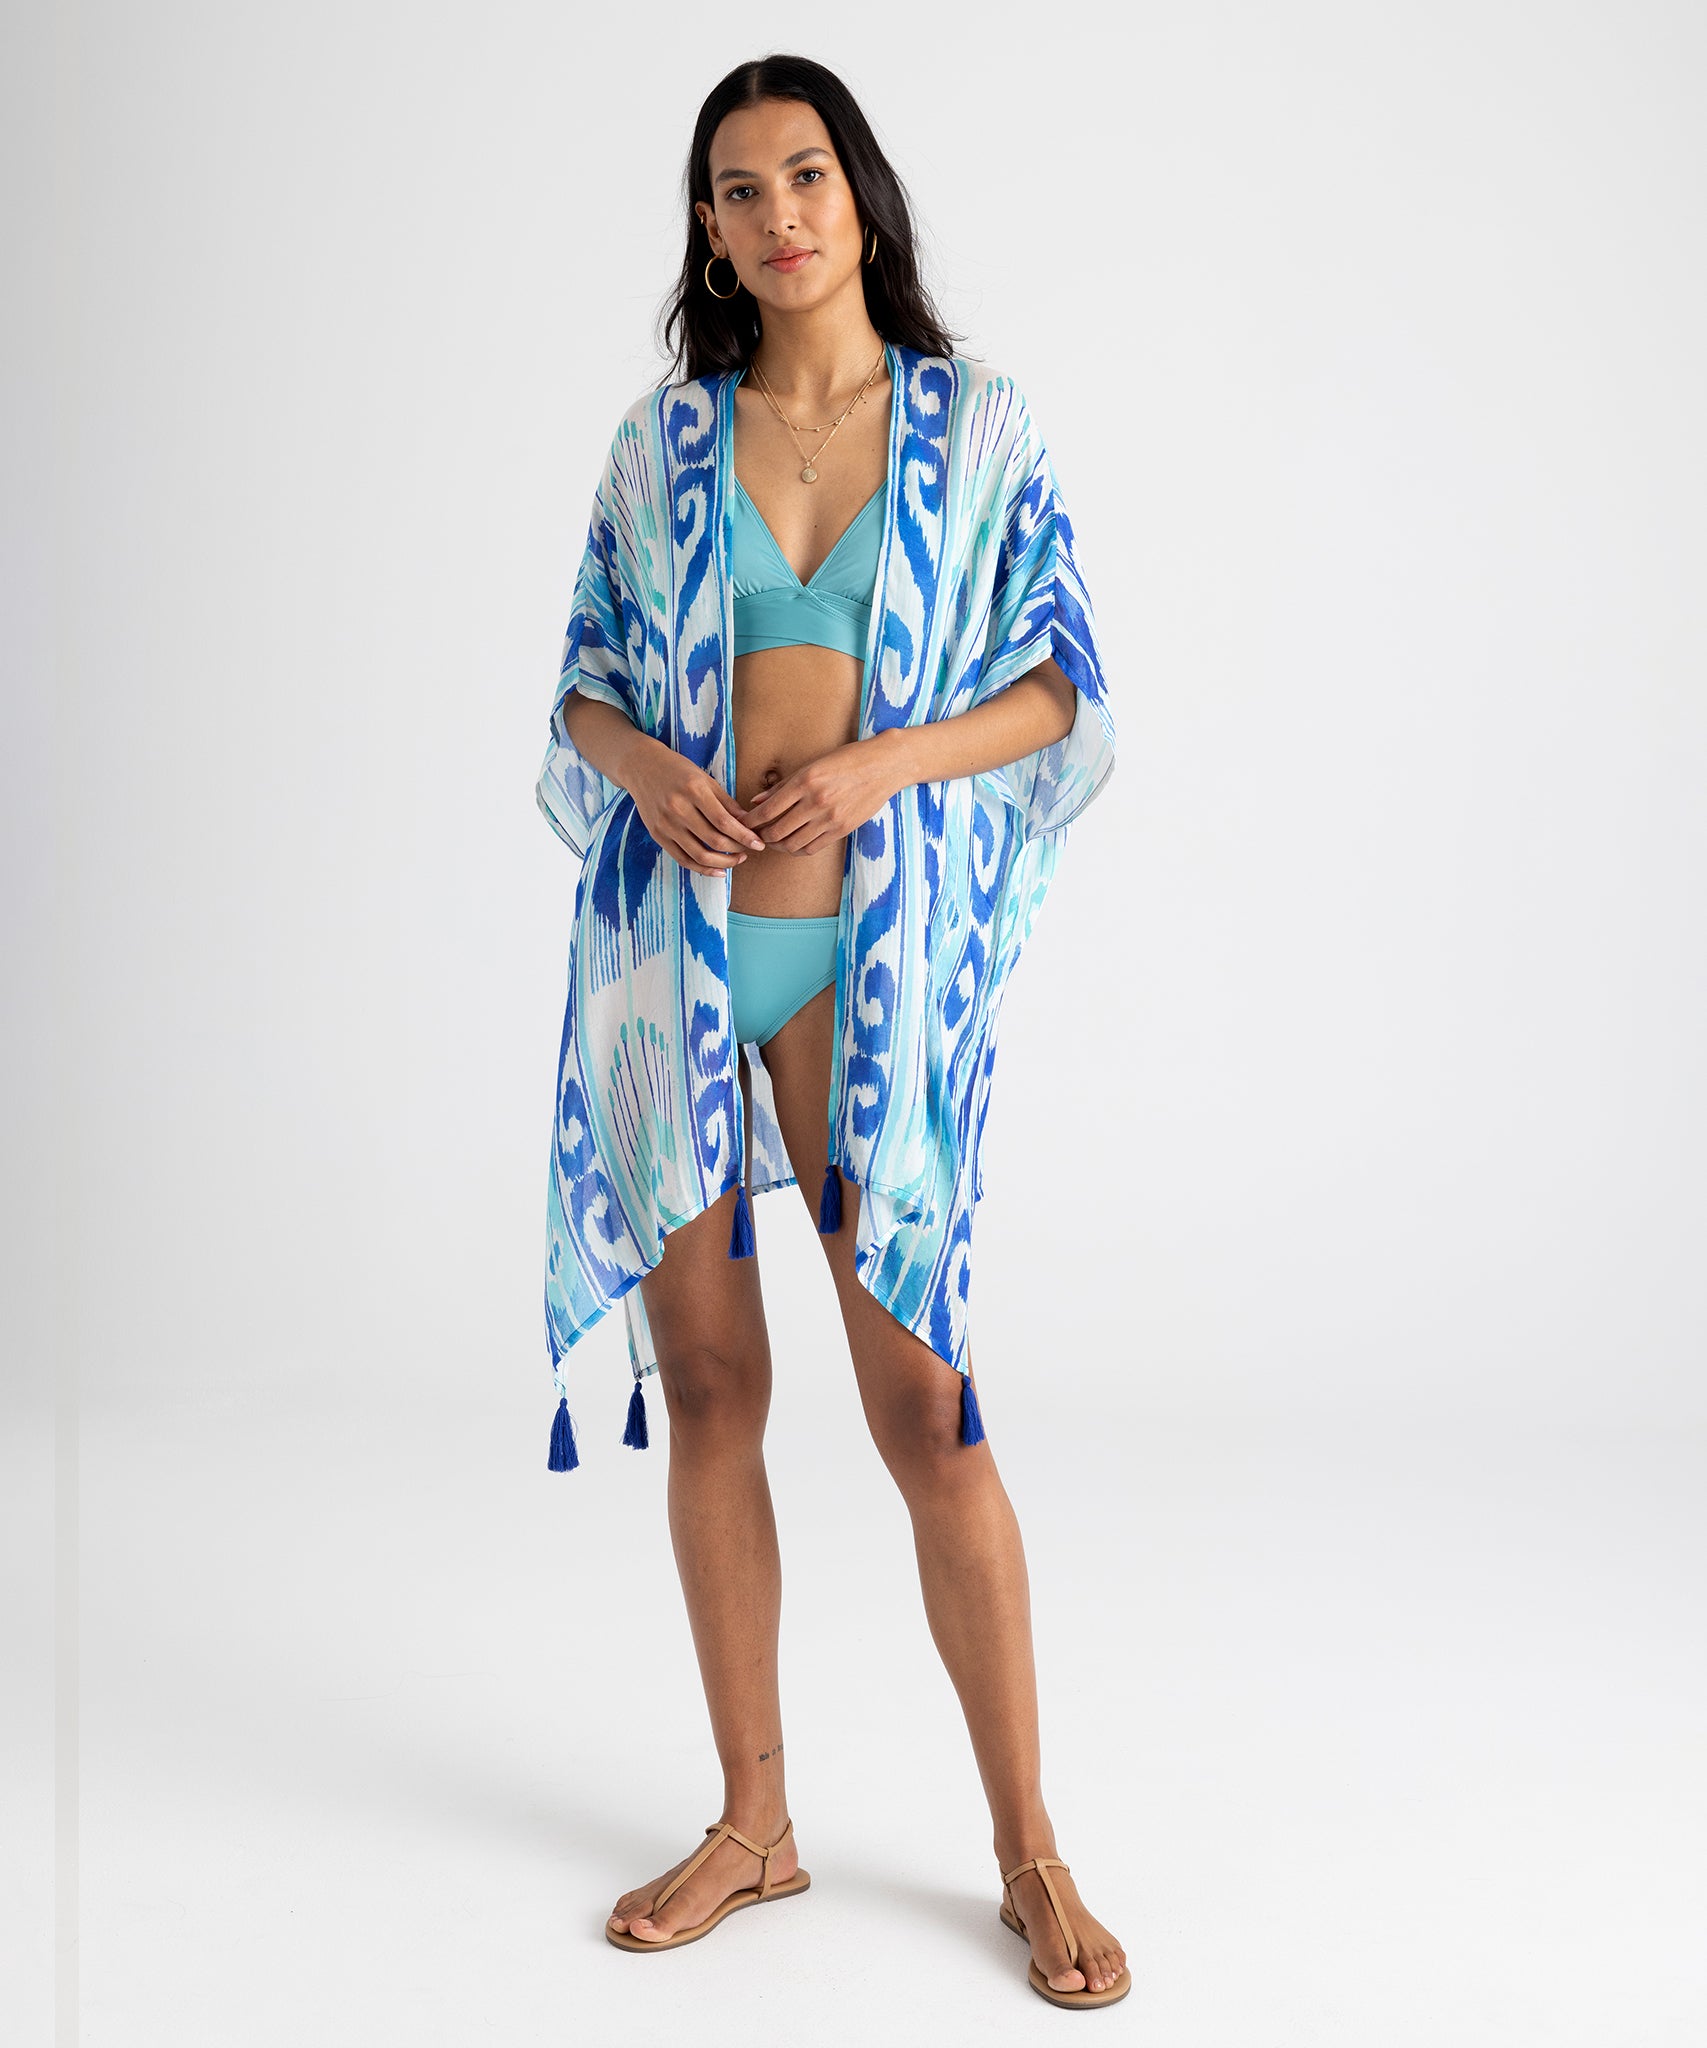 Women's Longline Swimsuits & Cover-Ups